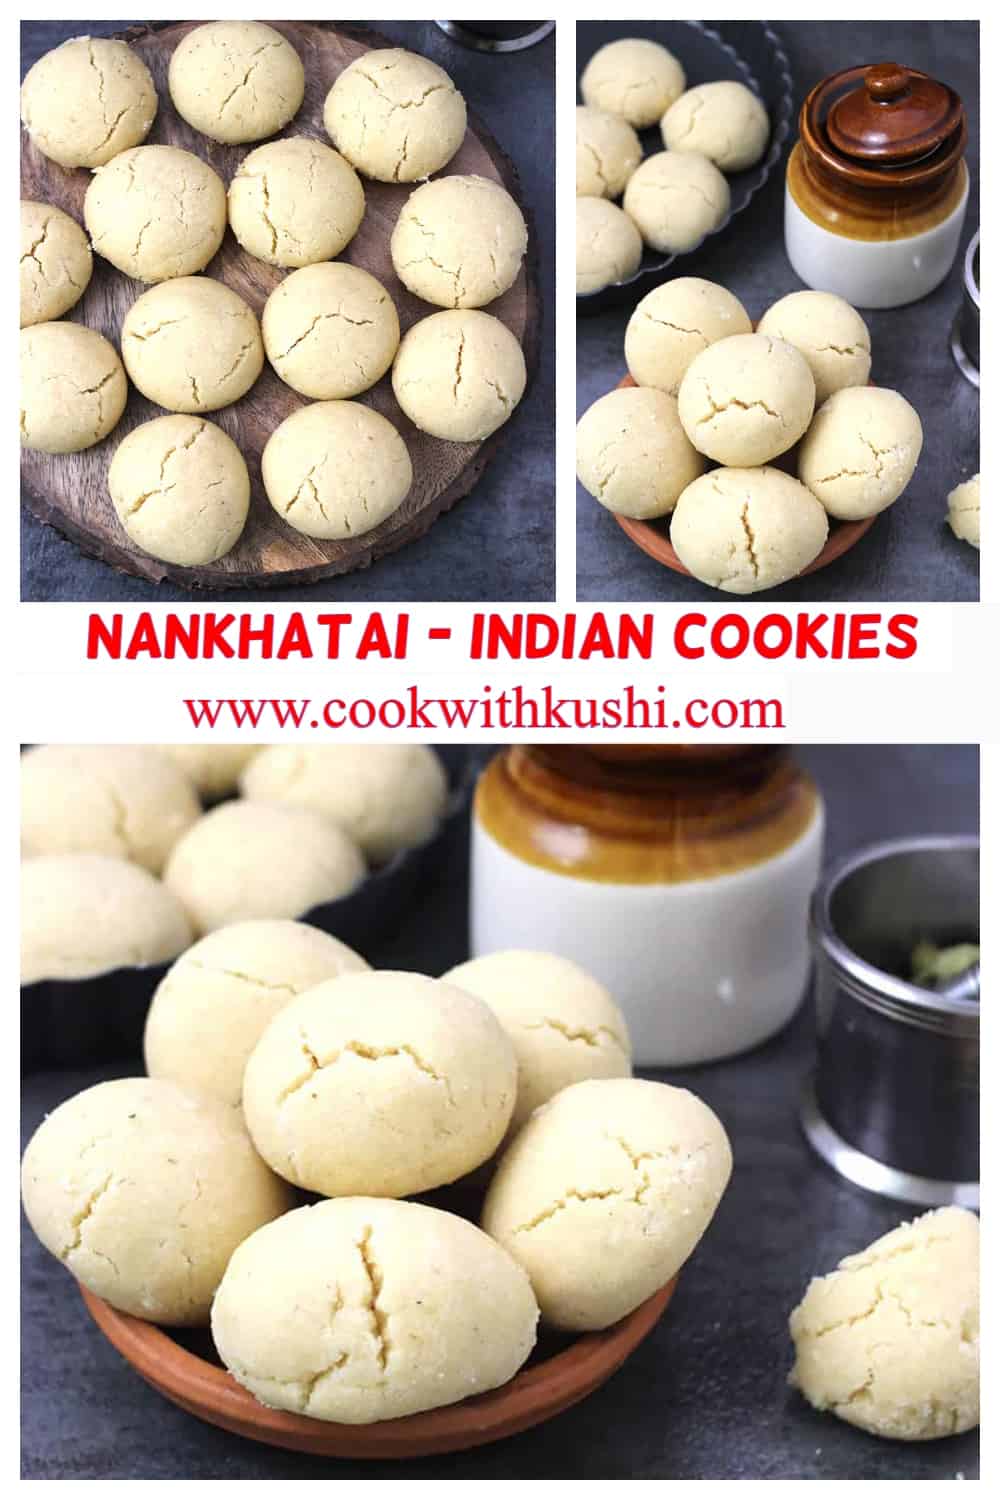 A collage of pics showing perfectly baked, crispy, melt-in-mouth Indian shortbread cookies called Nankhatai.